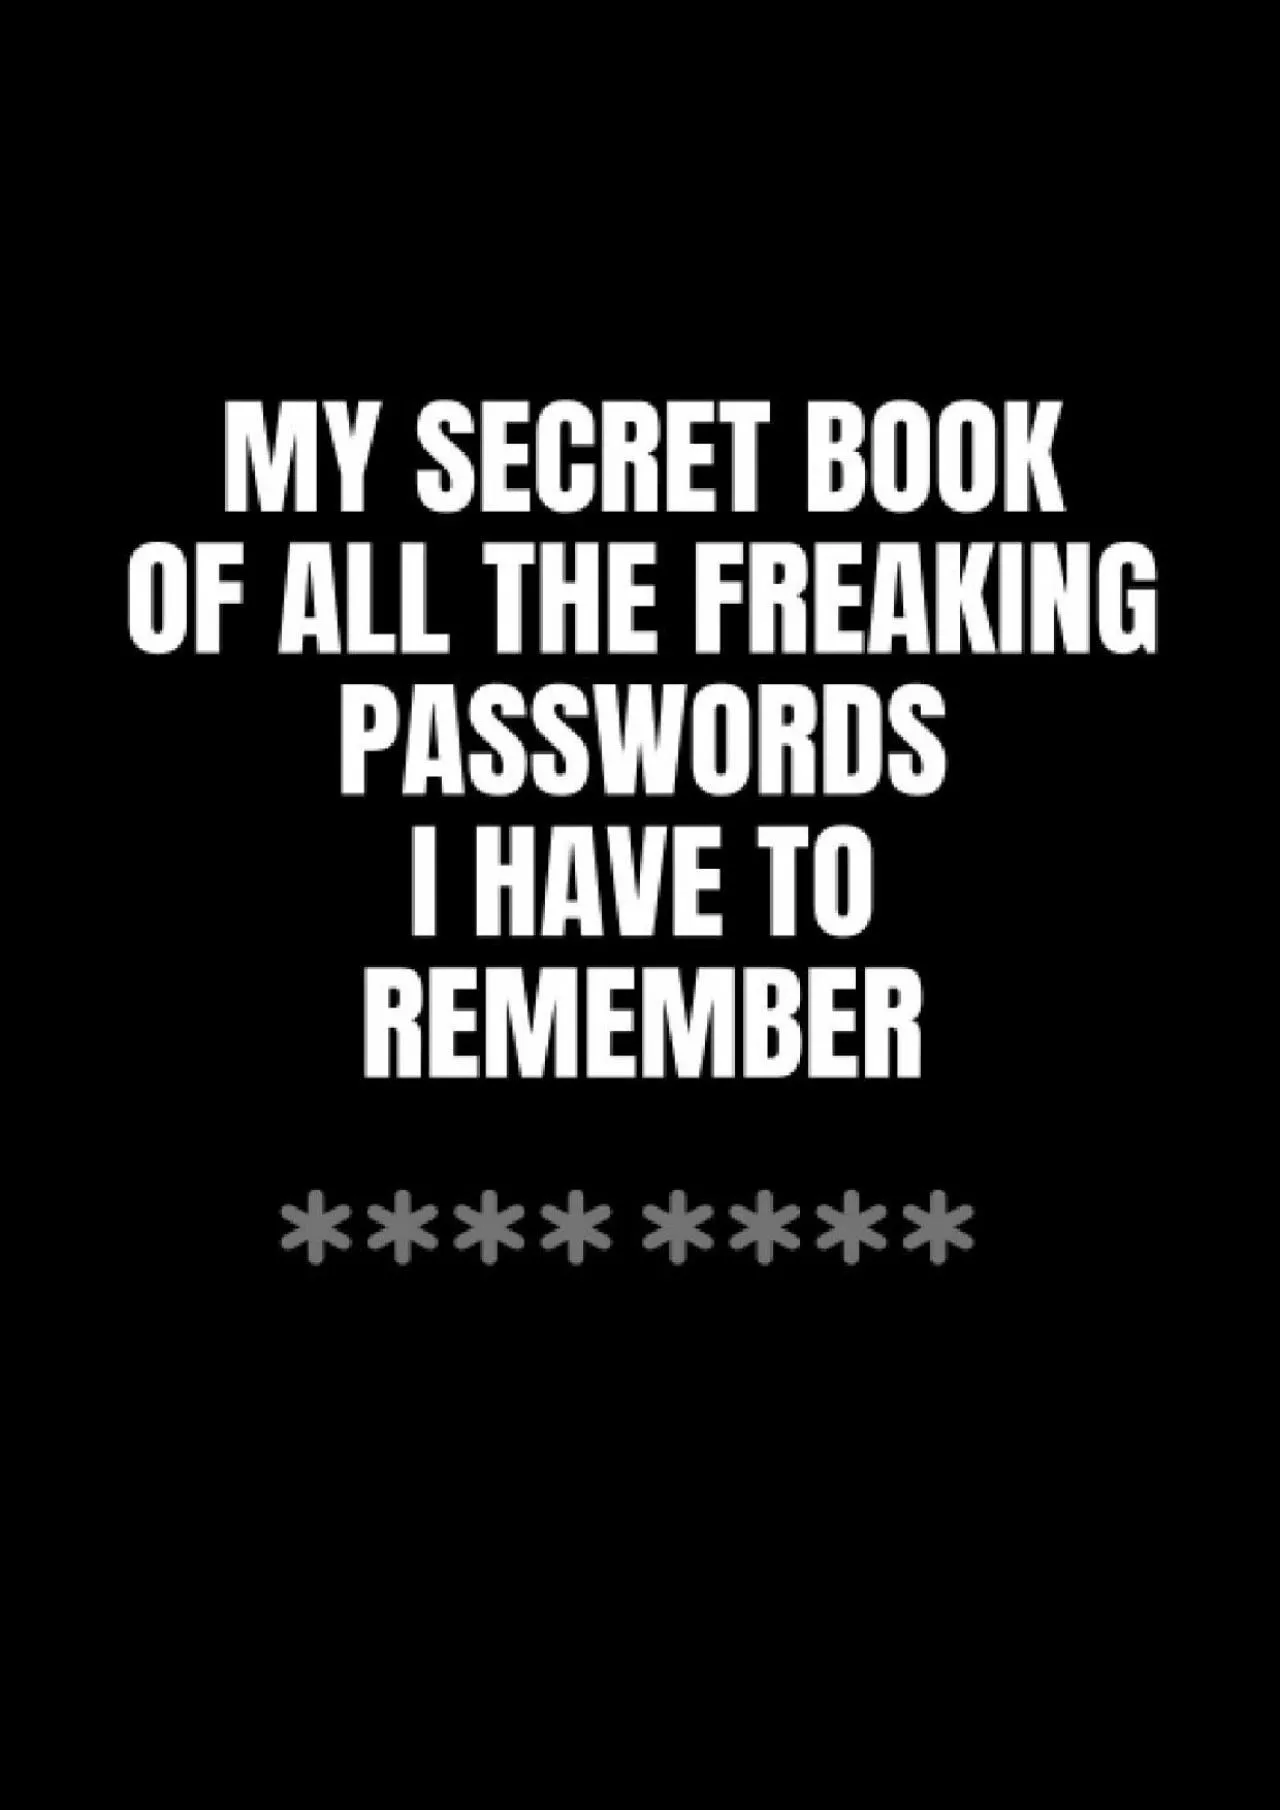 [DOWLOAD]-My Secret Book of all The Freaking Passwords I Have to Remember: Password Log